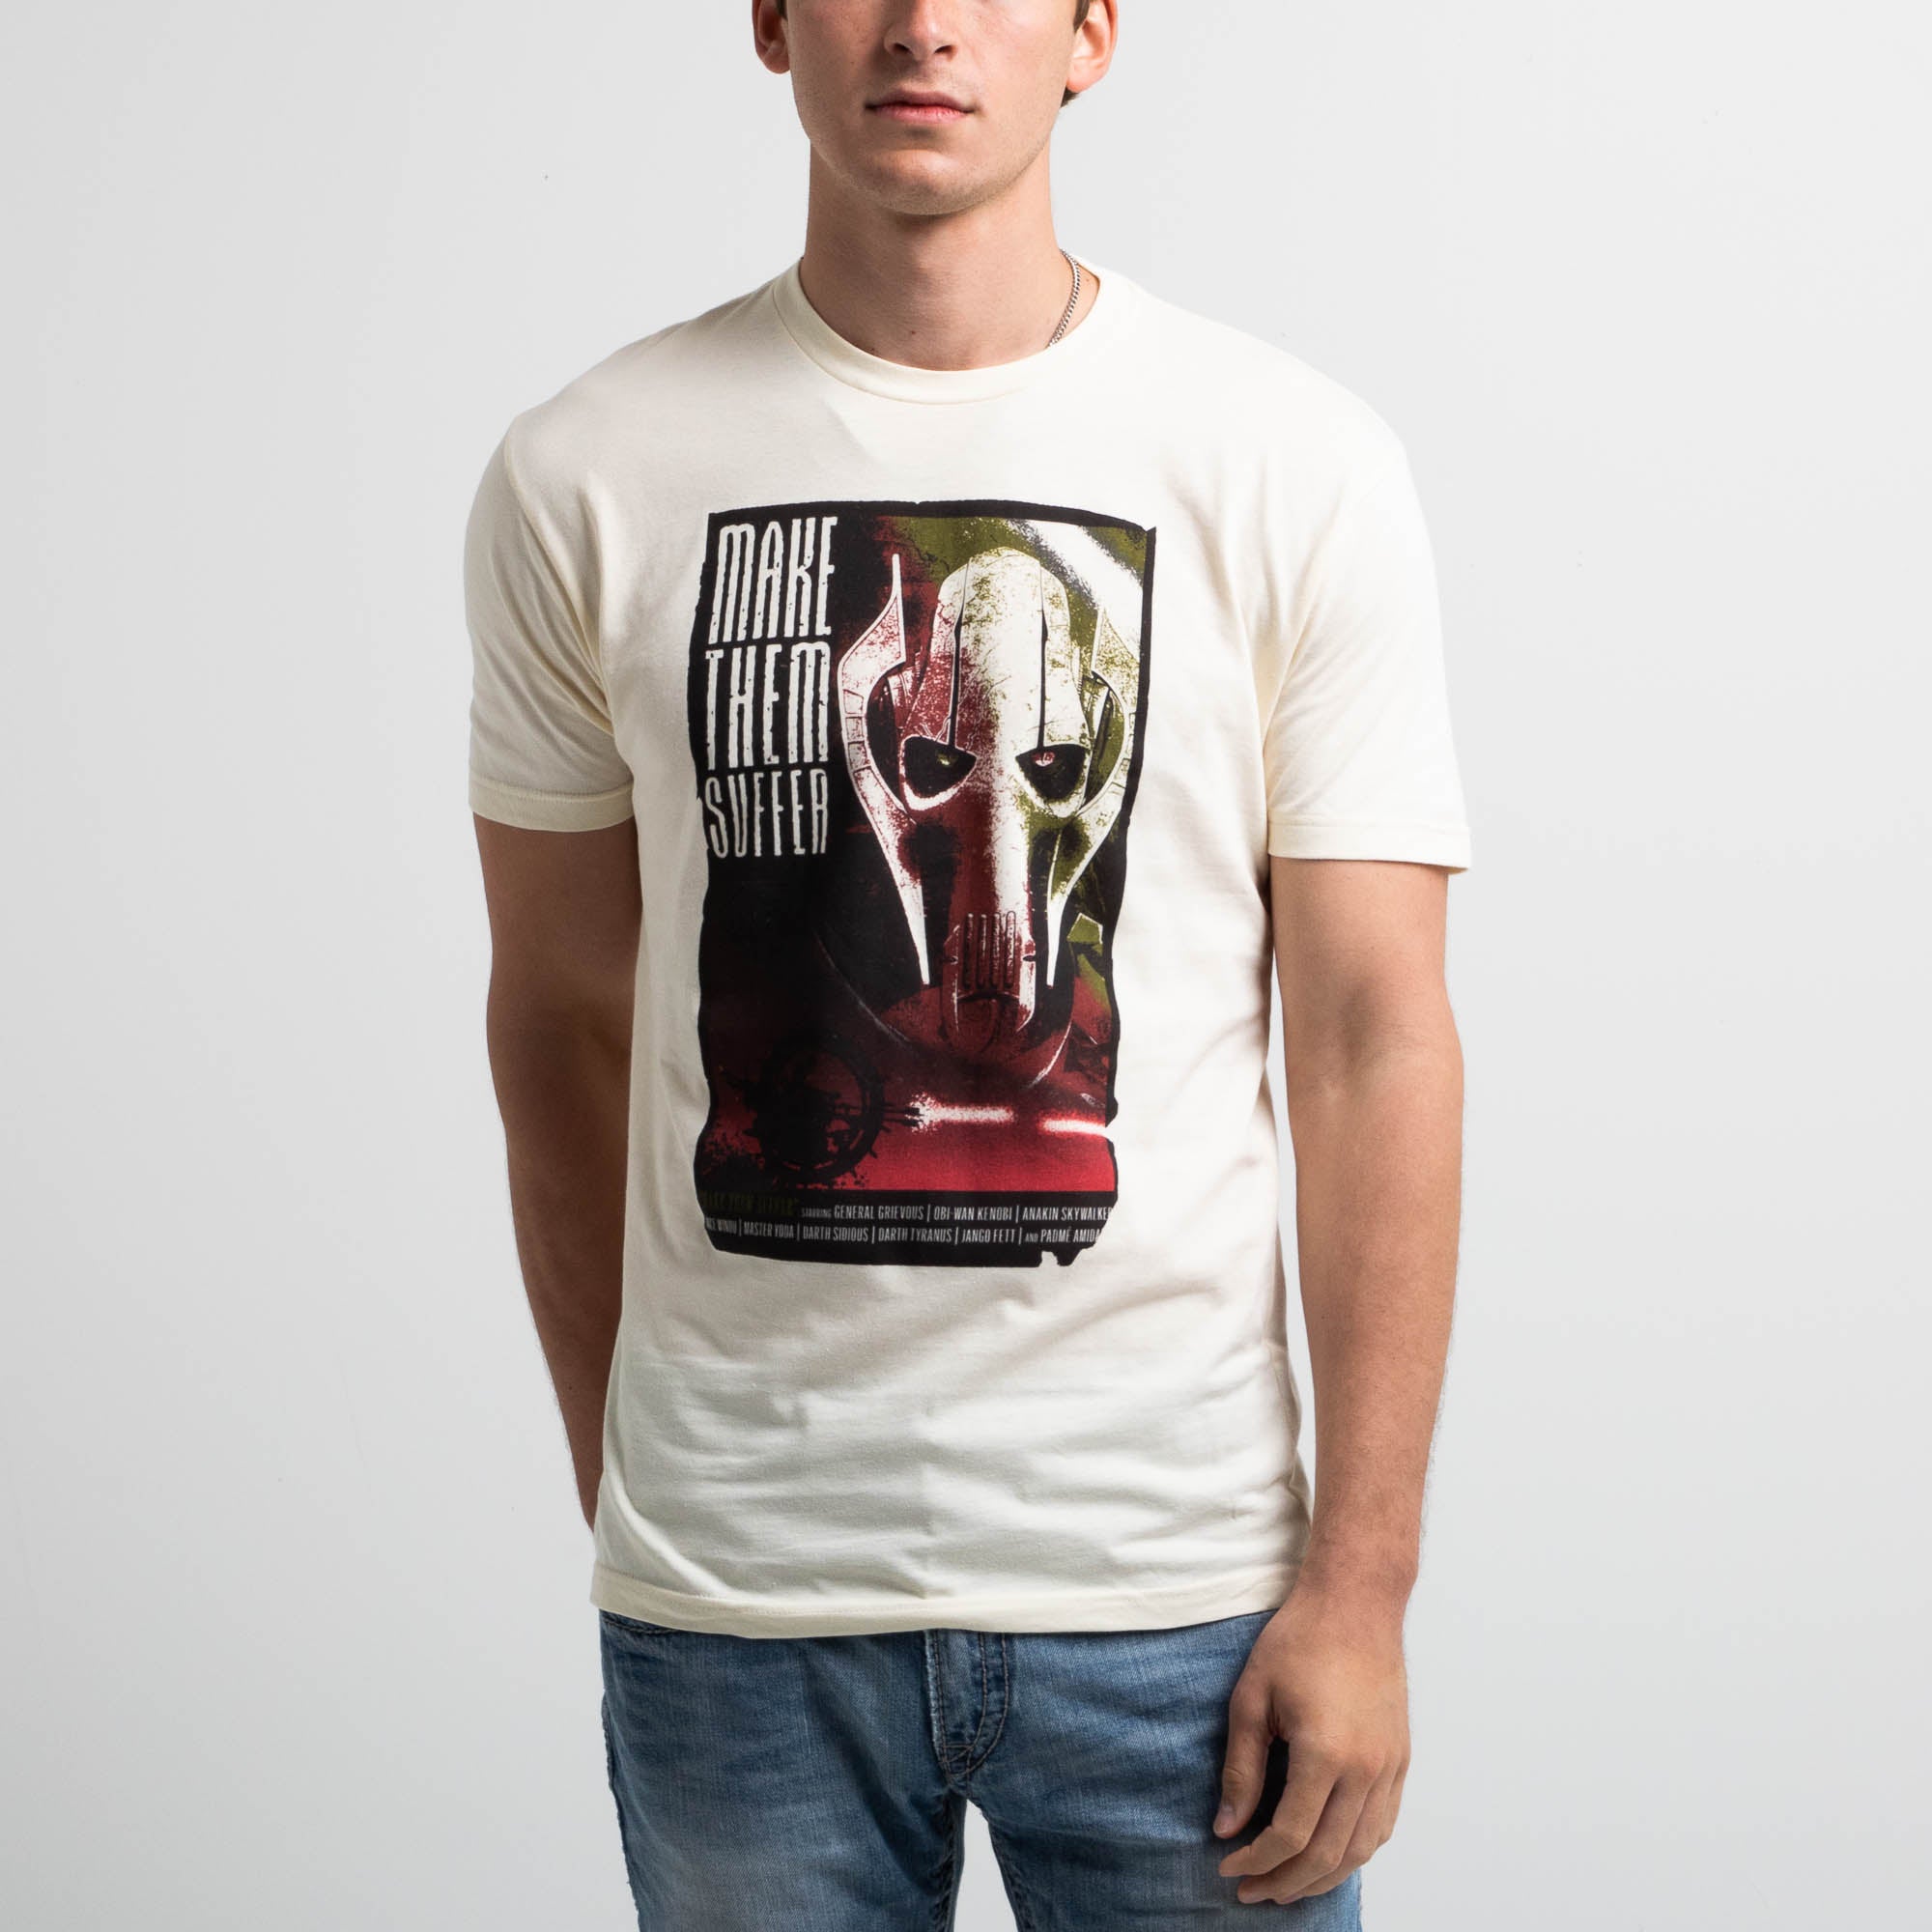 General Grievous Make Them Suffer Grindhouse Natural Tee